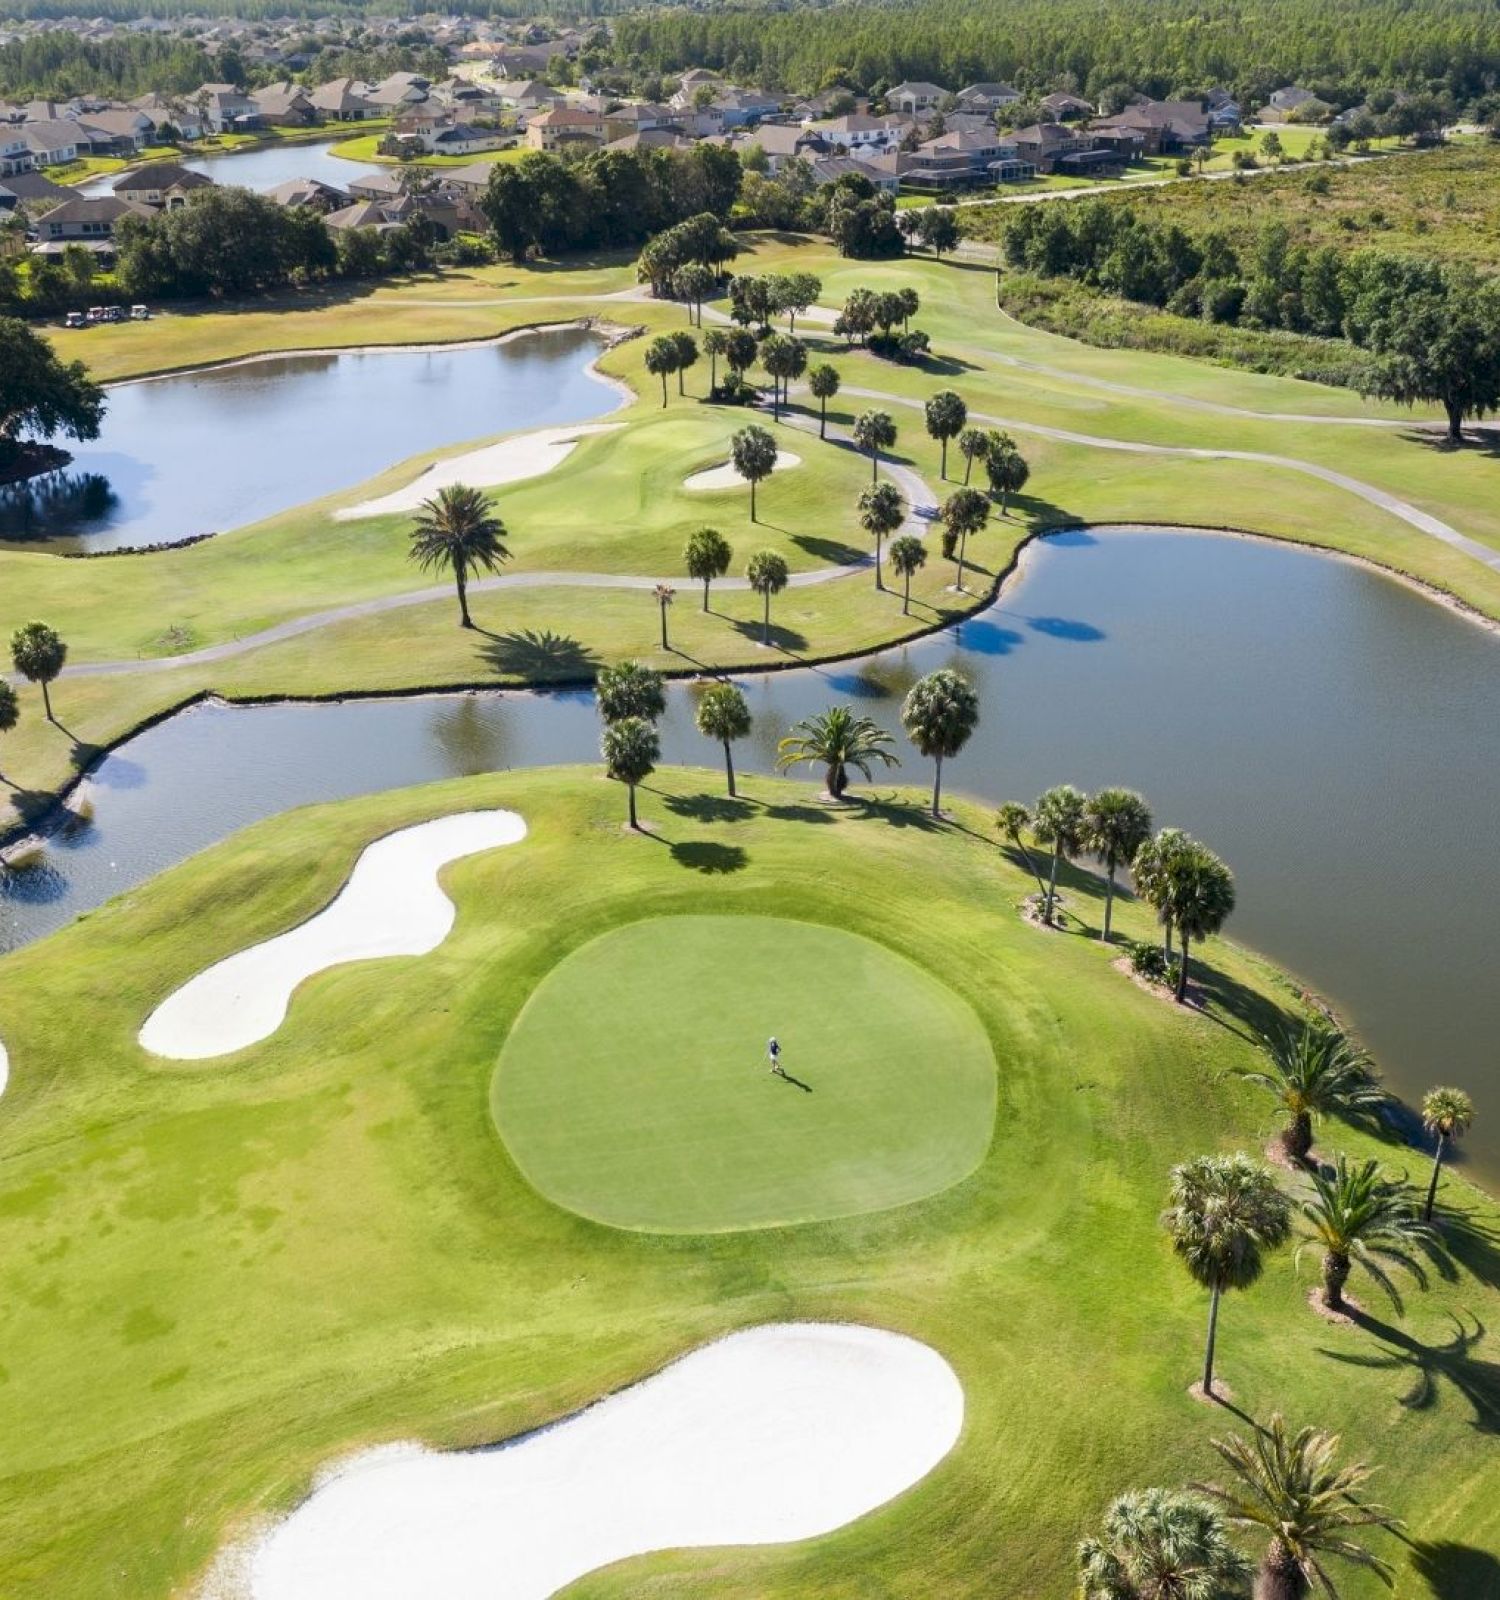 A scenic aerial view of a golf course featuring greens, sand bunkers, water hazards, palm trees, and surrounding residences in the background.